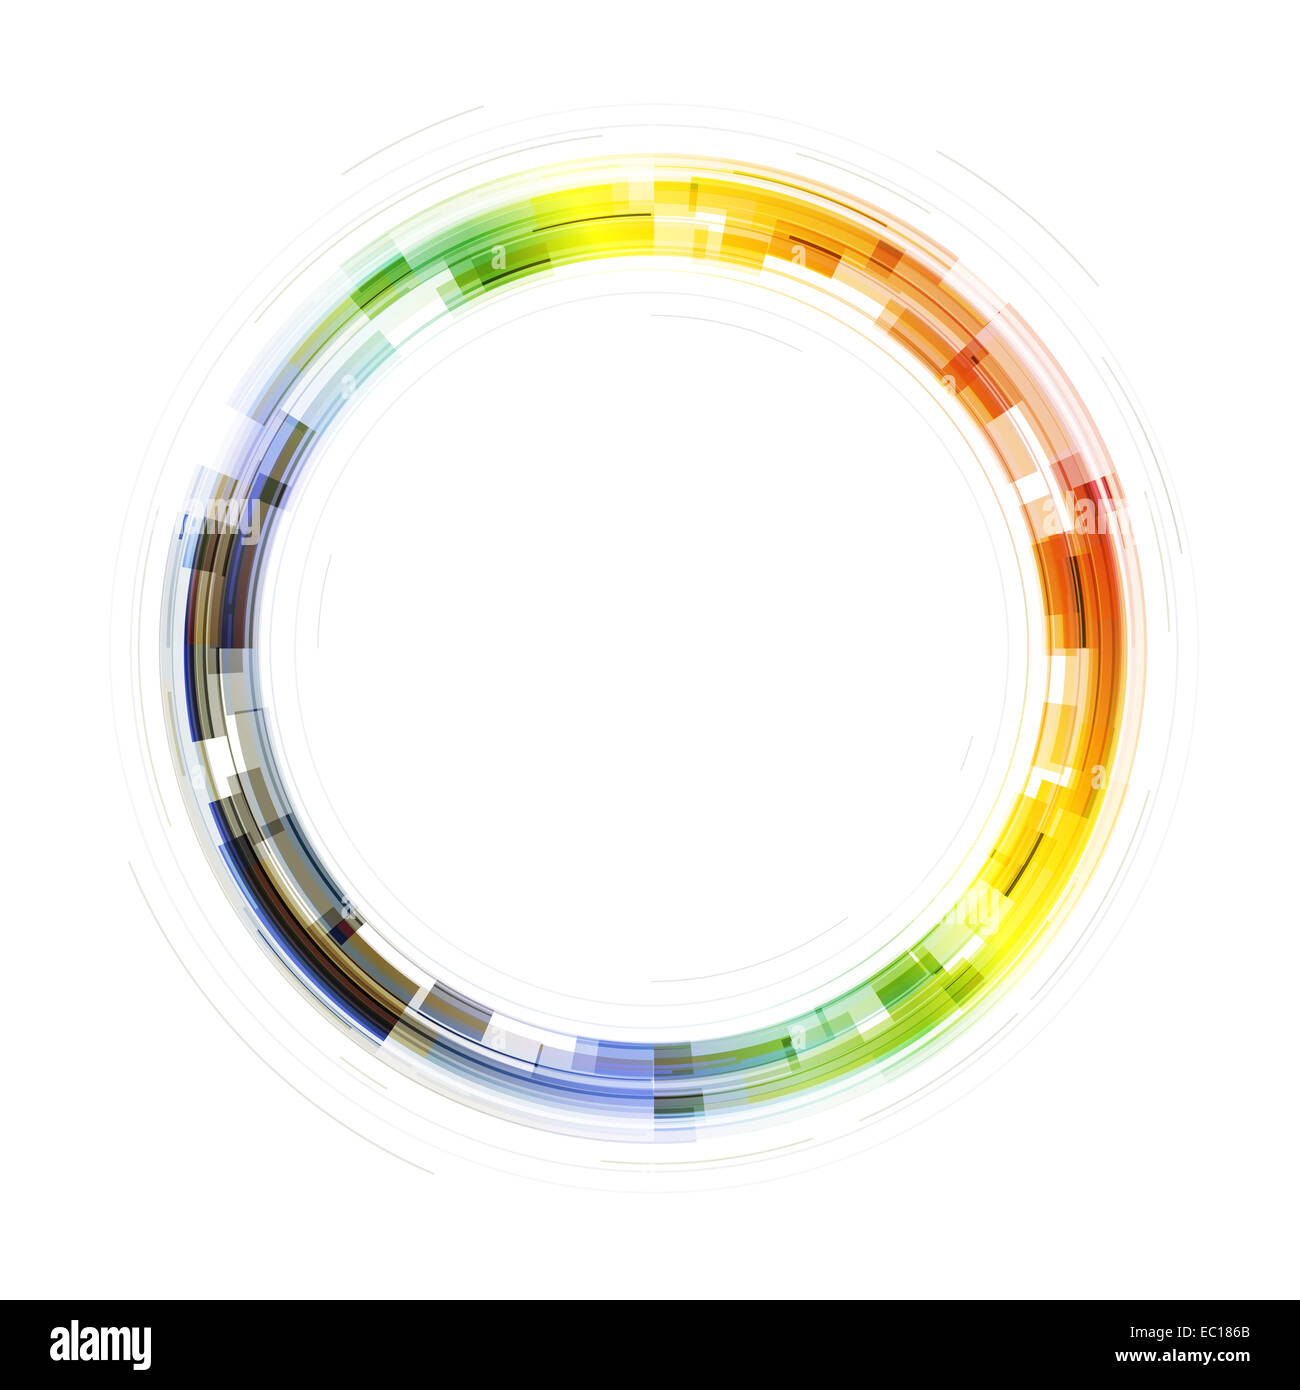 Colorful Transparent Circle Symbol. Template for Covers, Posters, Annual Reports etc Stock Photo